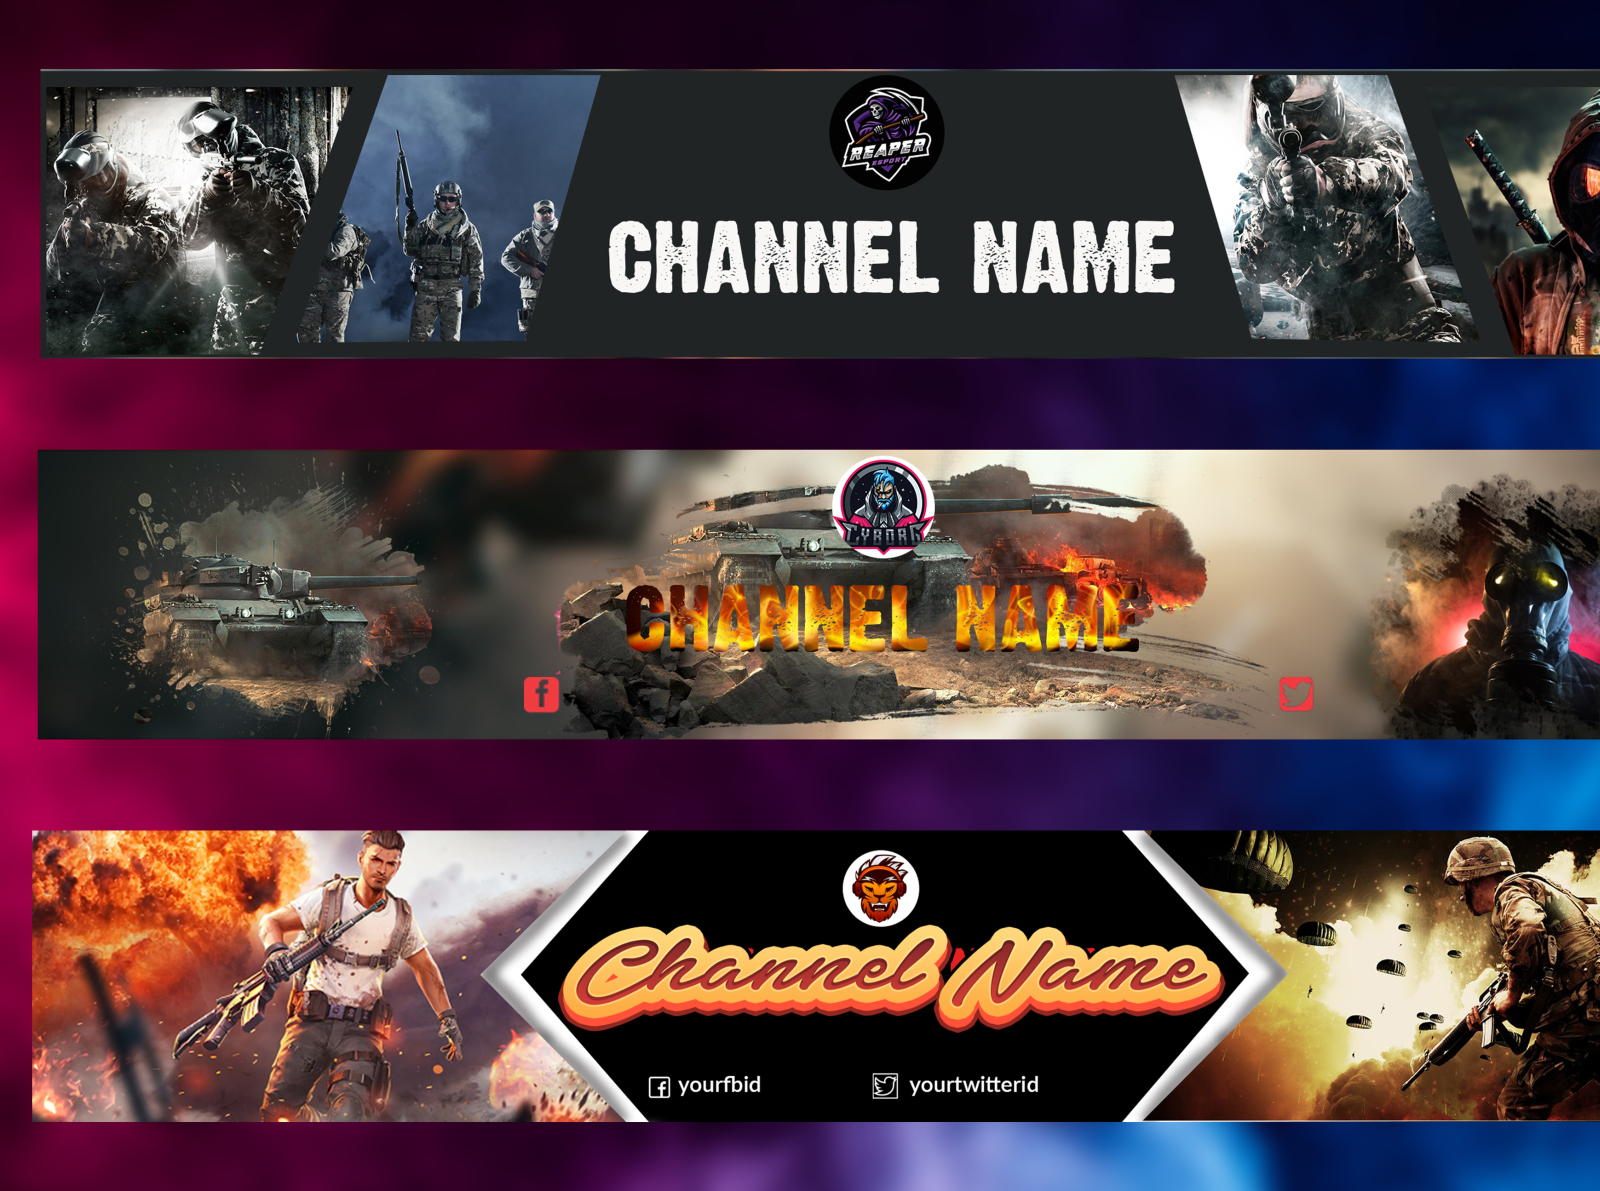 Design Creative And Unique Gaming YouTube Banner by Hosnain Ahmed on ...